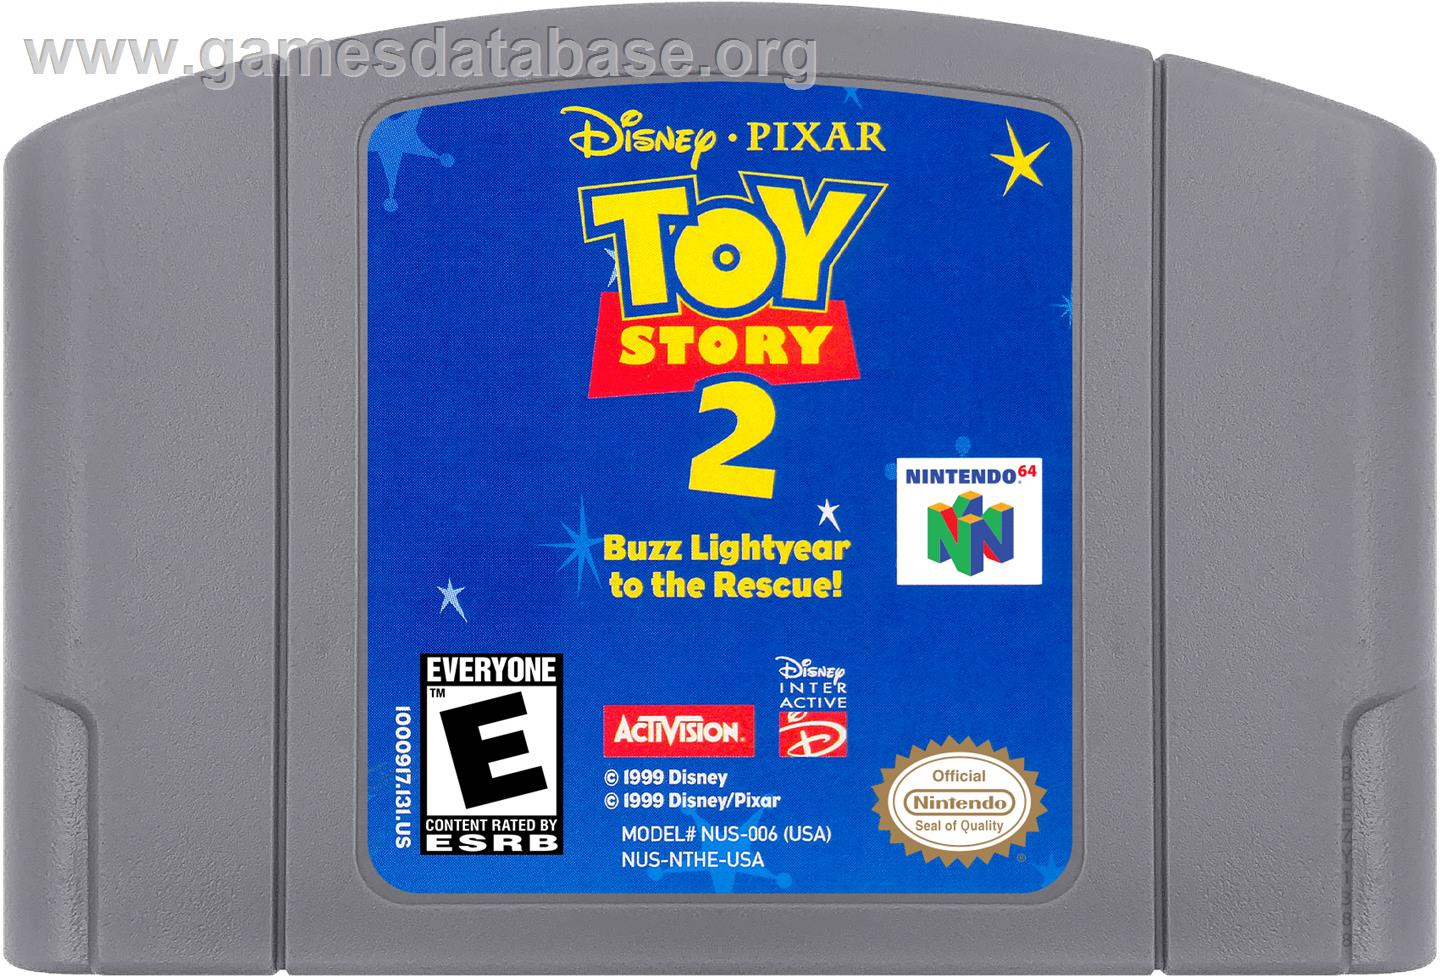 Toy Story 2: Buzz Lightyear to the Rescue - Nintendo N64 - Artwork - Cartridge